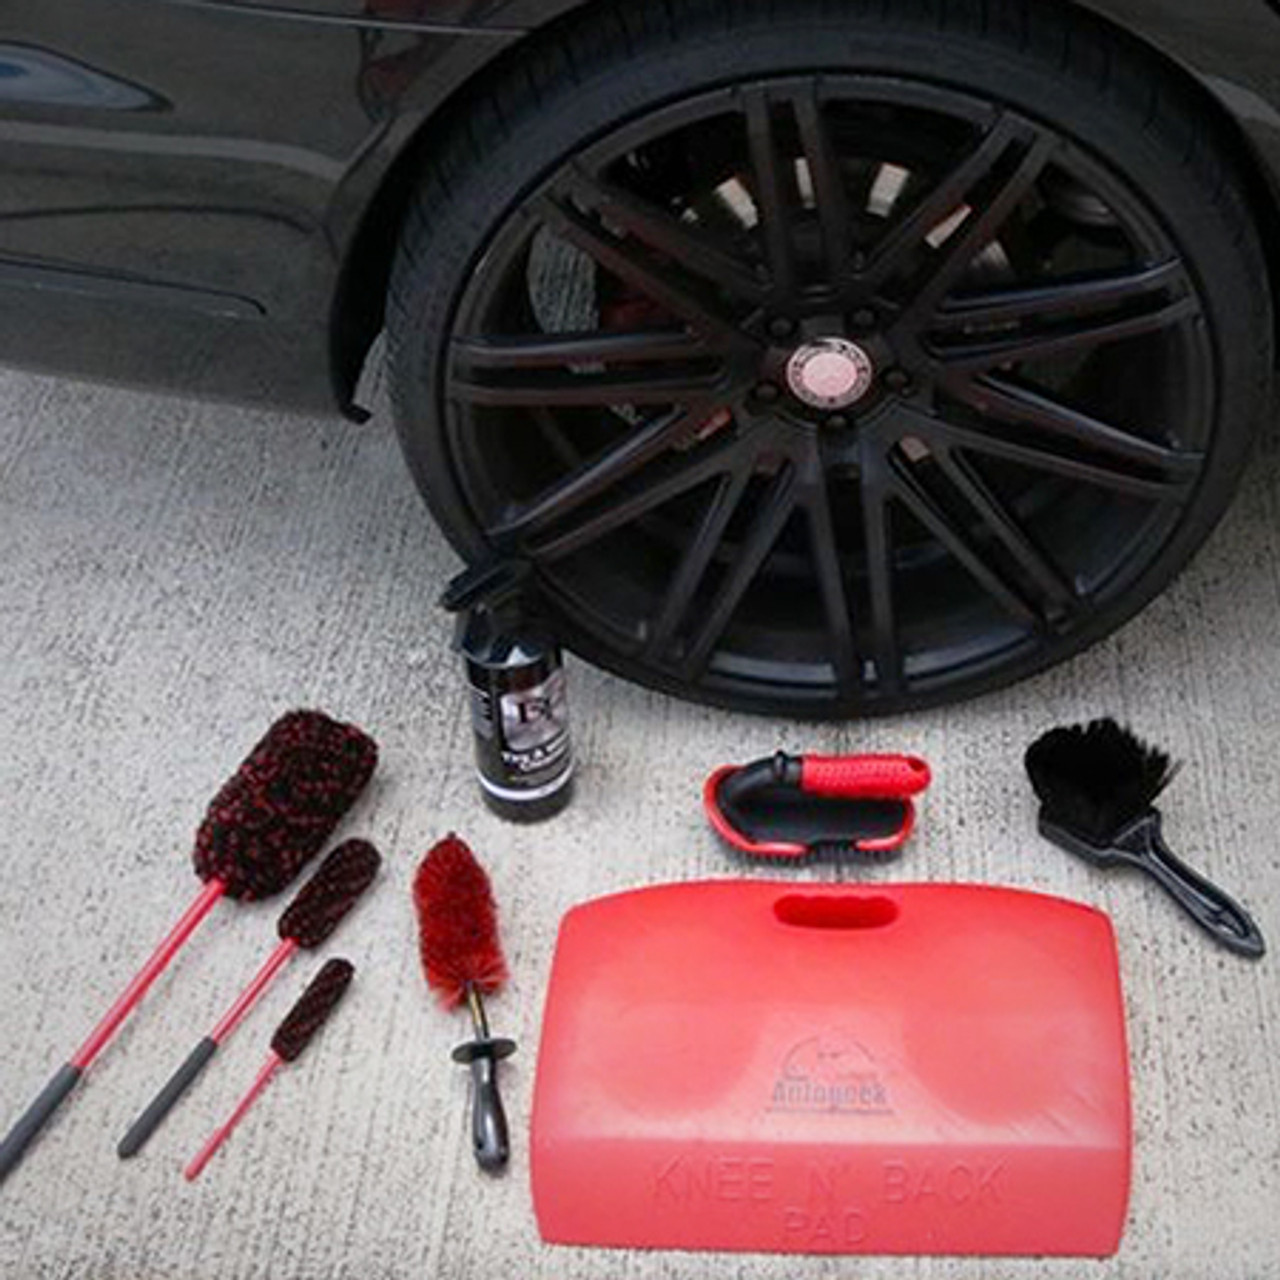 Concours Detailing Brush - Chemical Guys Professional Wheel Cleaning Brush  